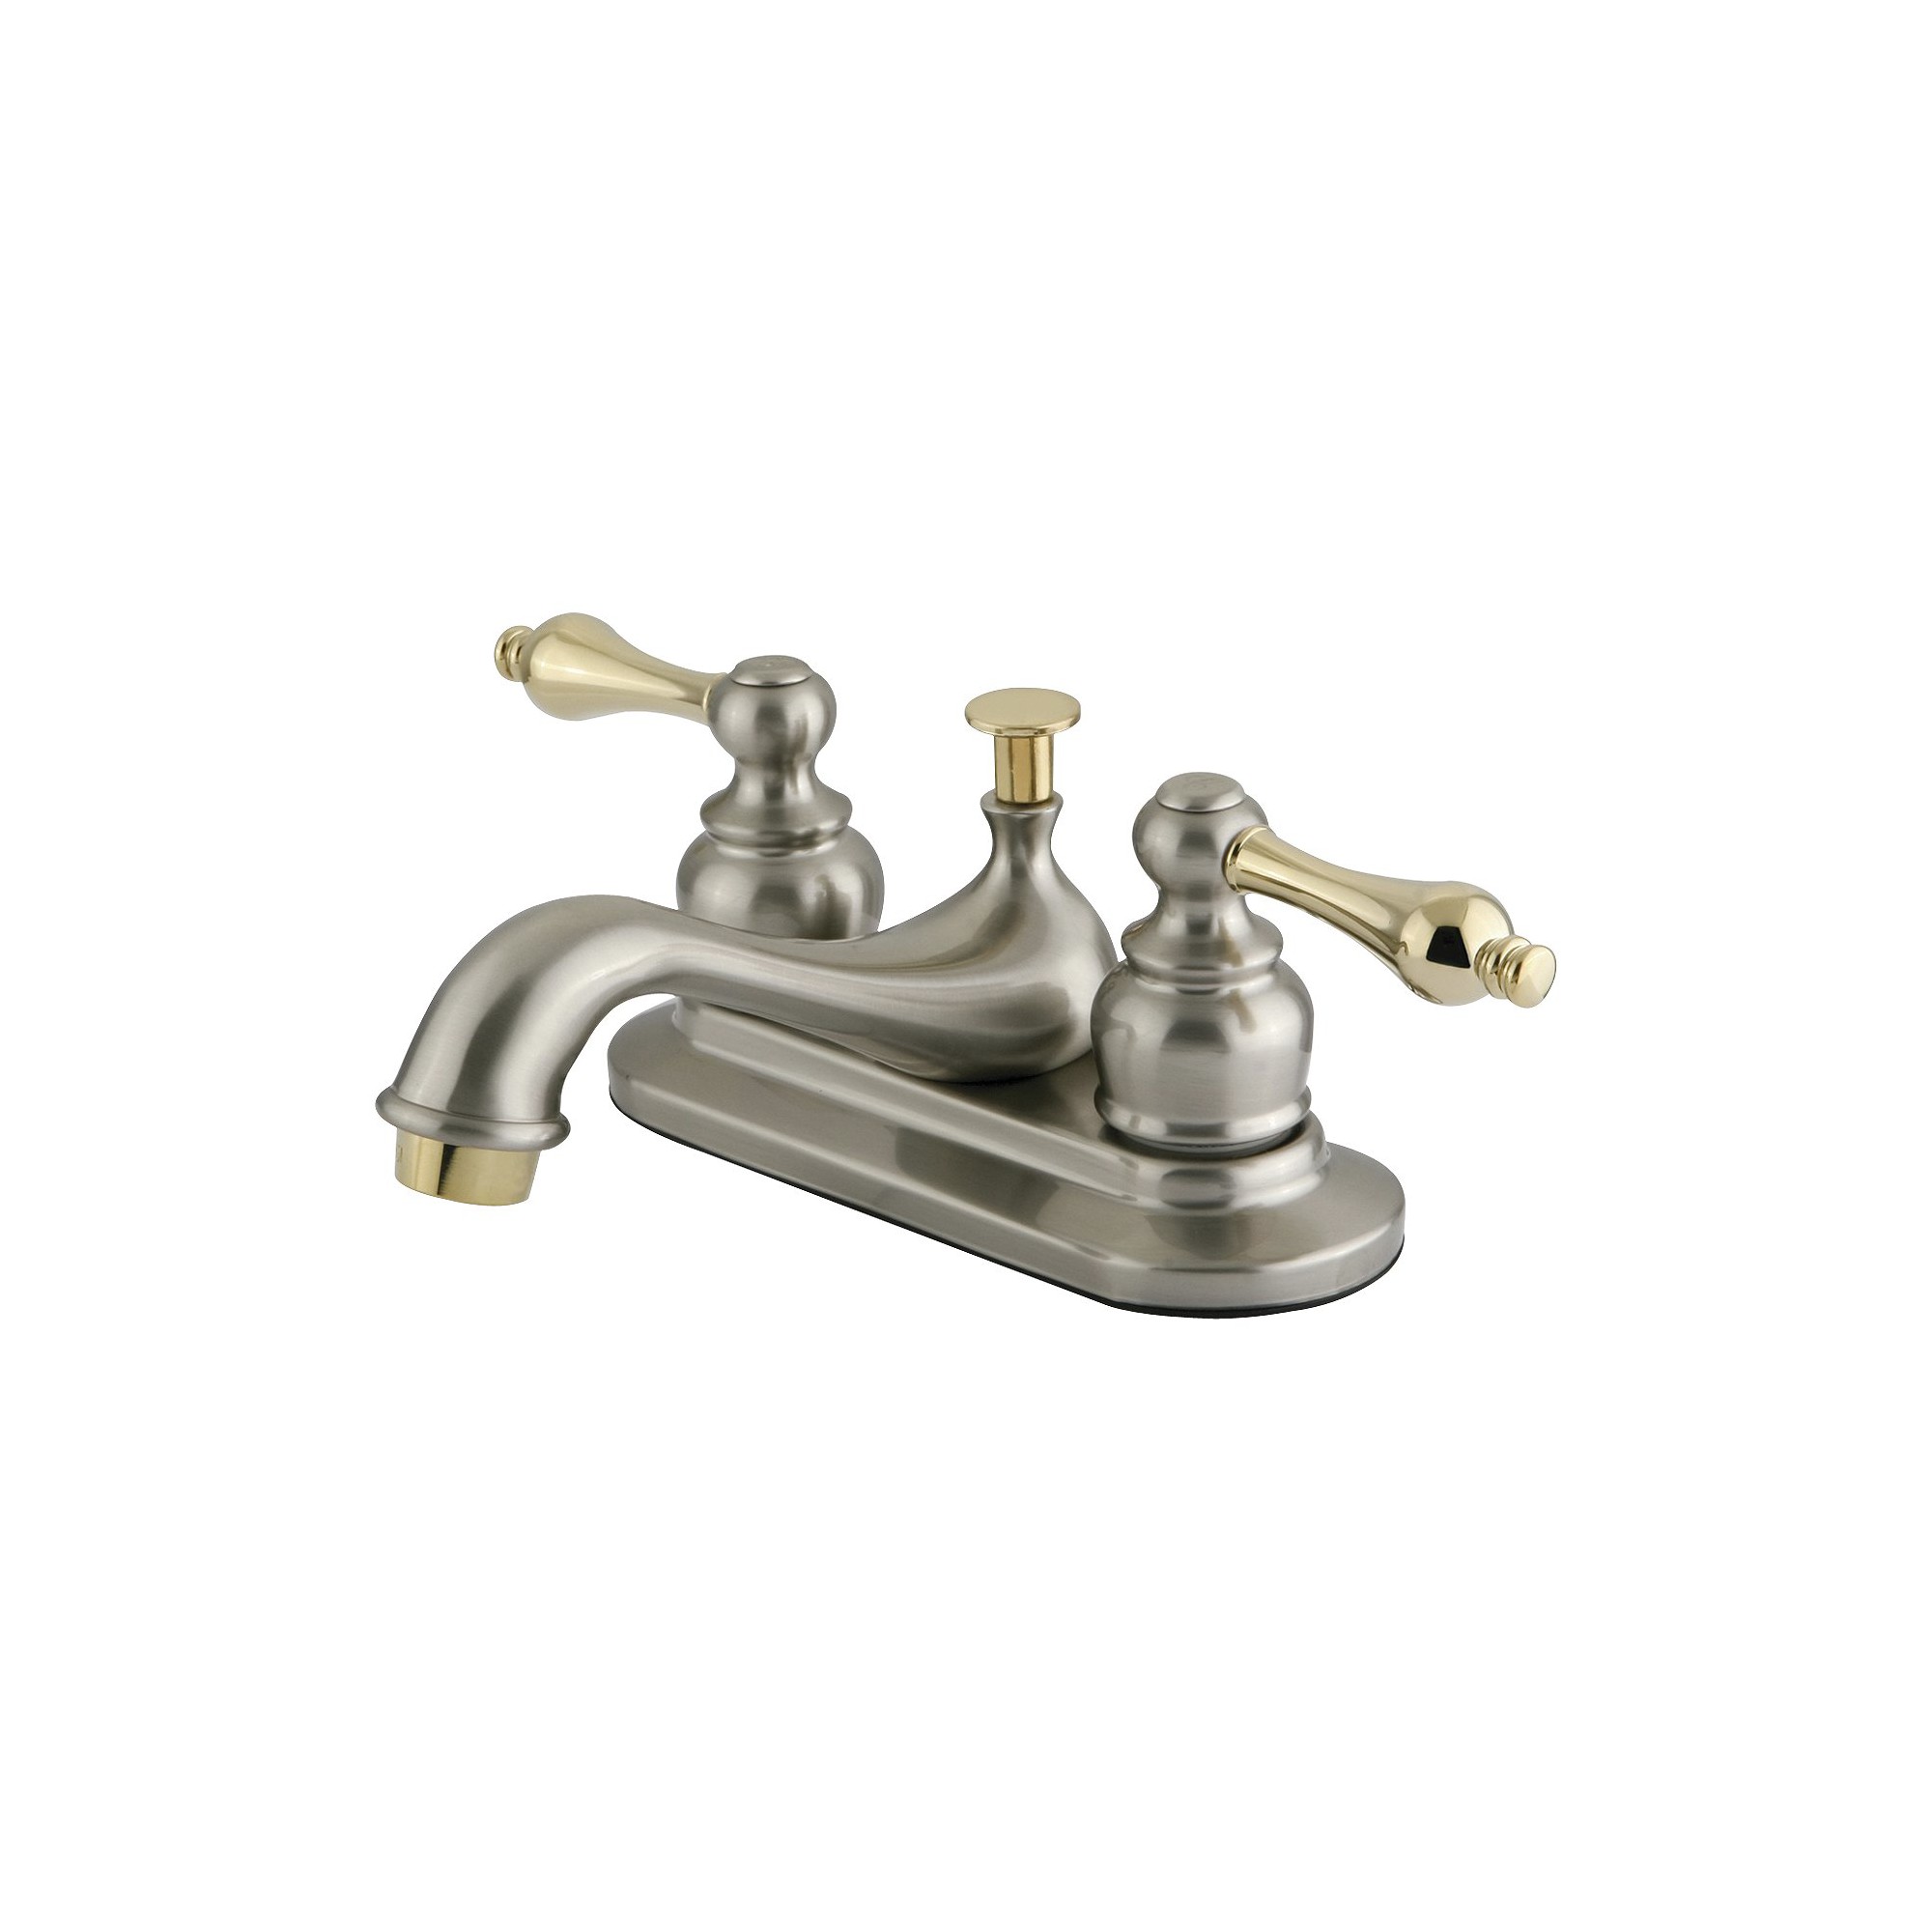 Traditional Bathroom Faucet Satin Nickel and Polished Brass - Kingston Brass, Satin Nickle